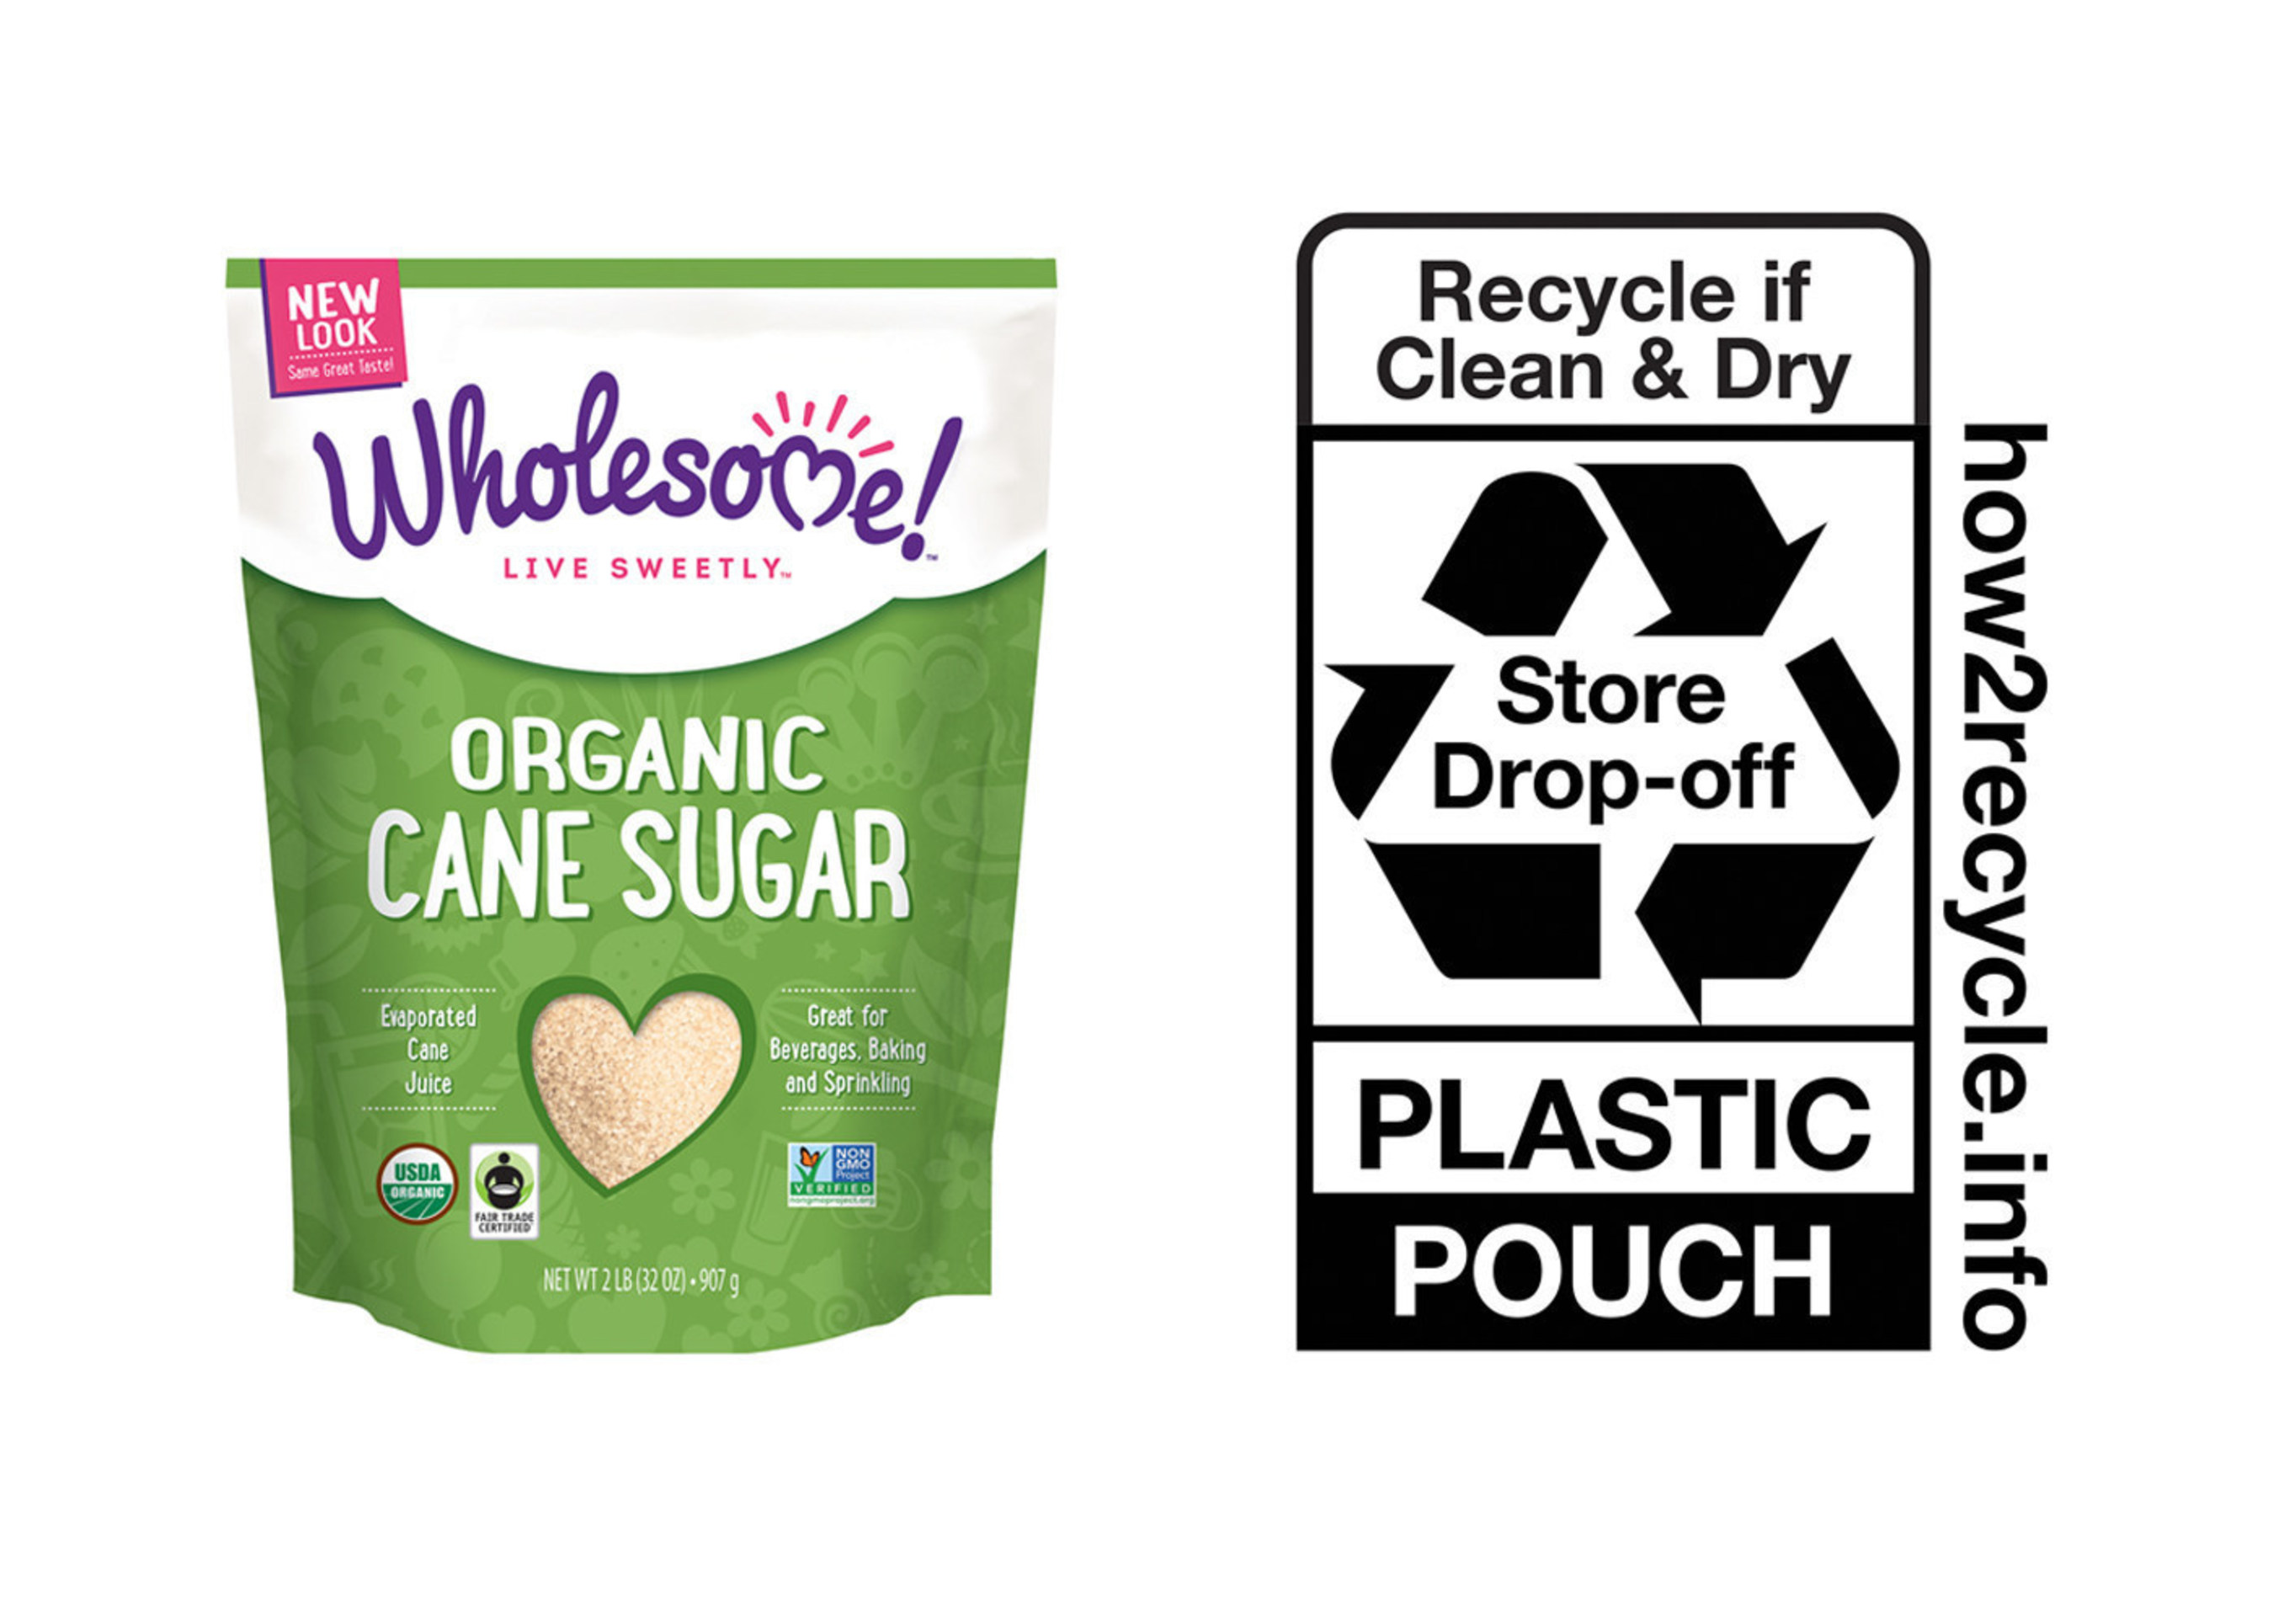 Wholesome! will be the first organic sweetener brand to join How2Recycle in promoting recycling education. How2Recycle has created a universal recycling language for consumers through the use of special on-package logos that provide clear instructions for each piece of recyclable packaging. Wholesome! will first integrate these logos onto its organic granulated sugar pouches and then transition its remaining U.S. products to a package with the How2Recycle logo over the next year. The recyclable stand-up pouches will carry the "store drop off" logo instructing consumers to drop their empty pouches in the plastic bag recycling bins found at most grocery stores.